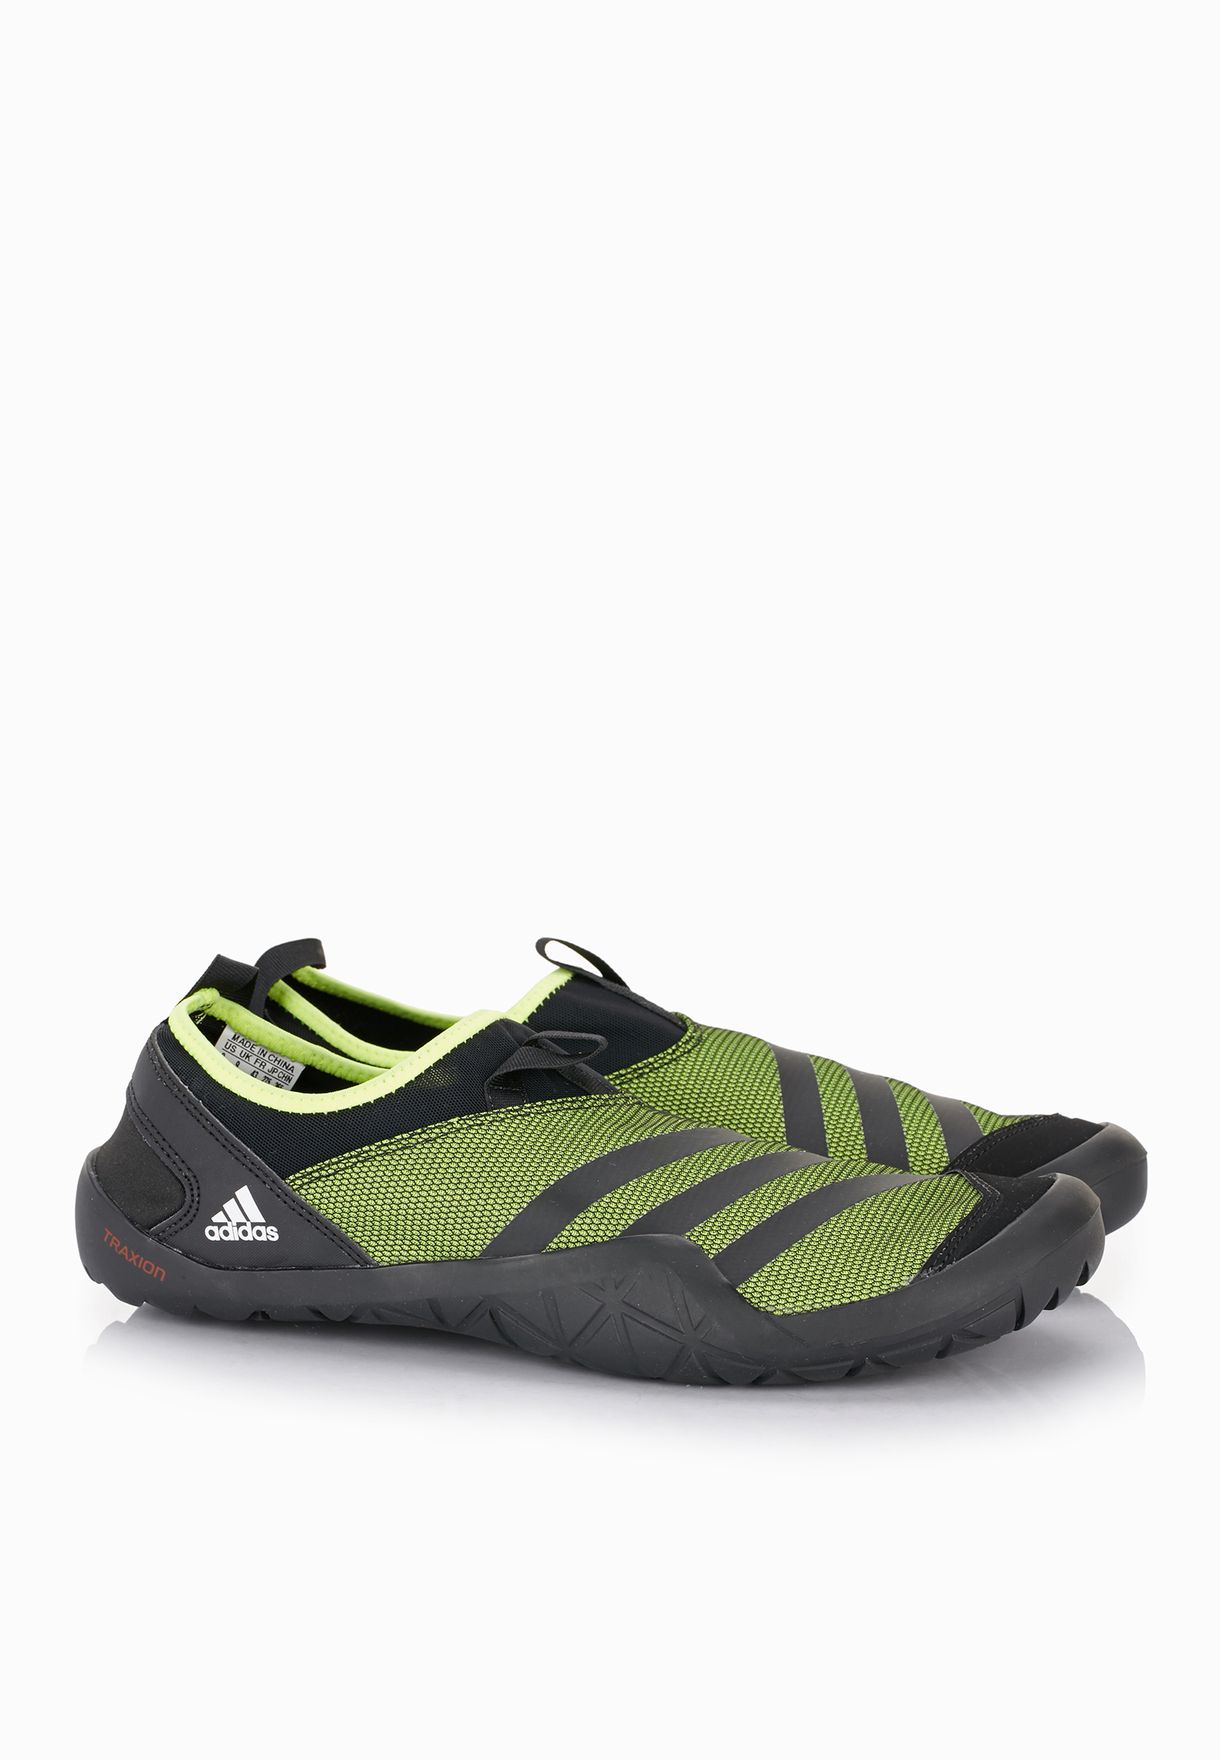 adidas men's climacool jawpaw slip on loafers and moccasins